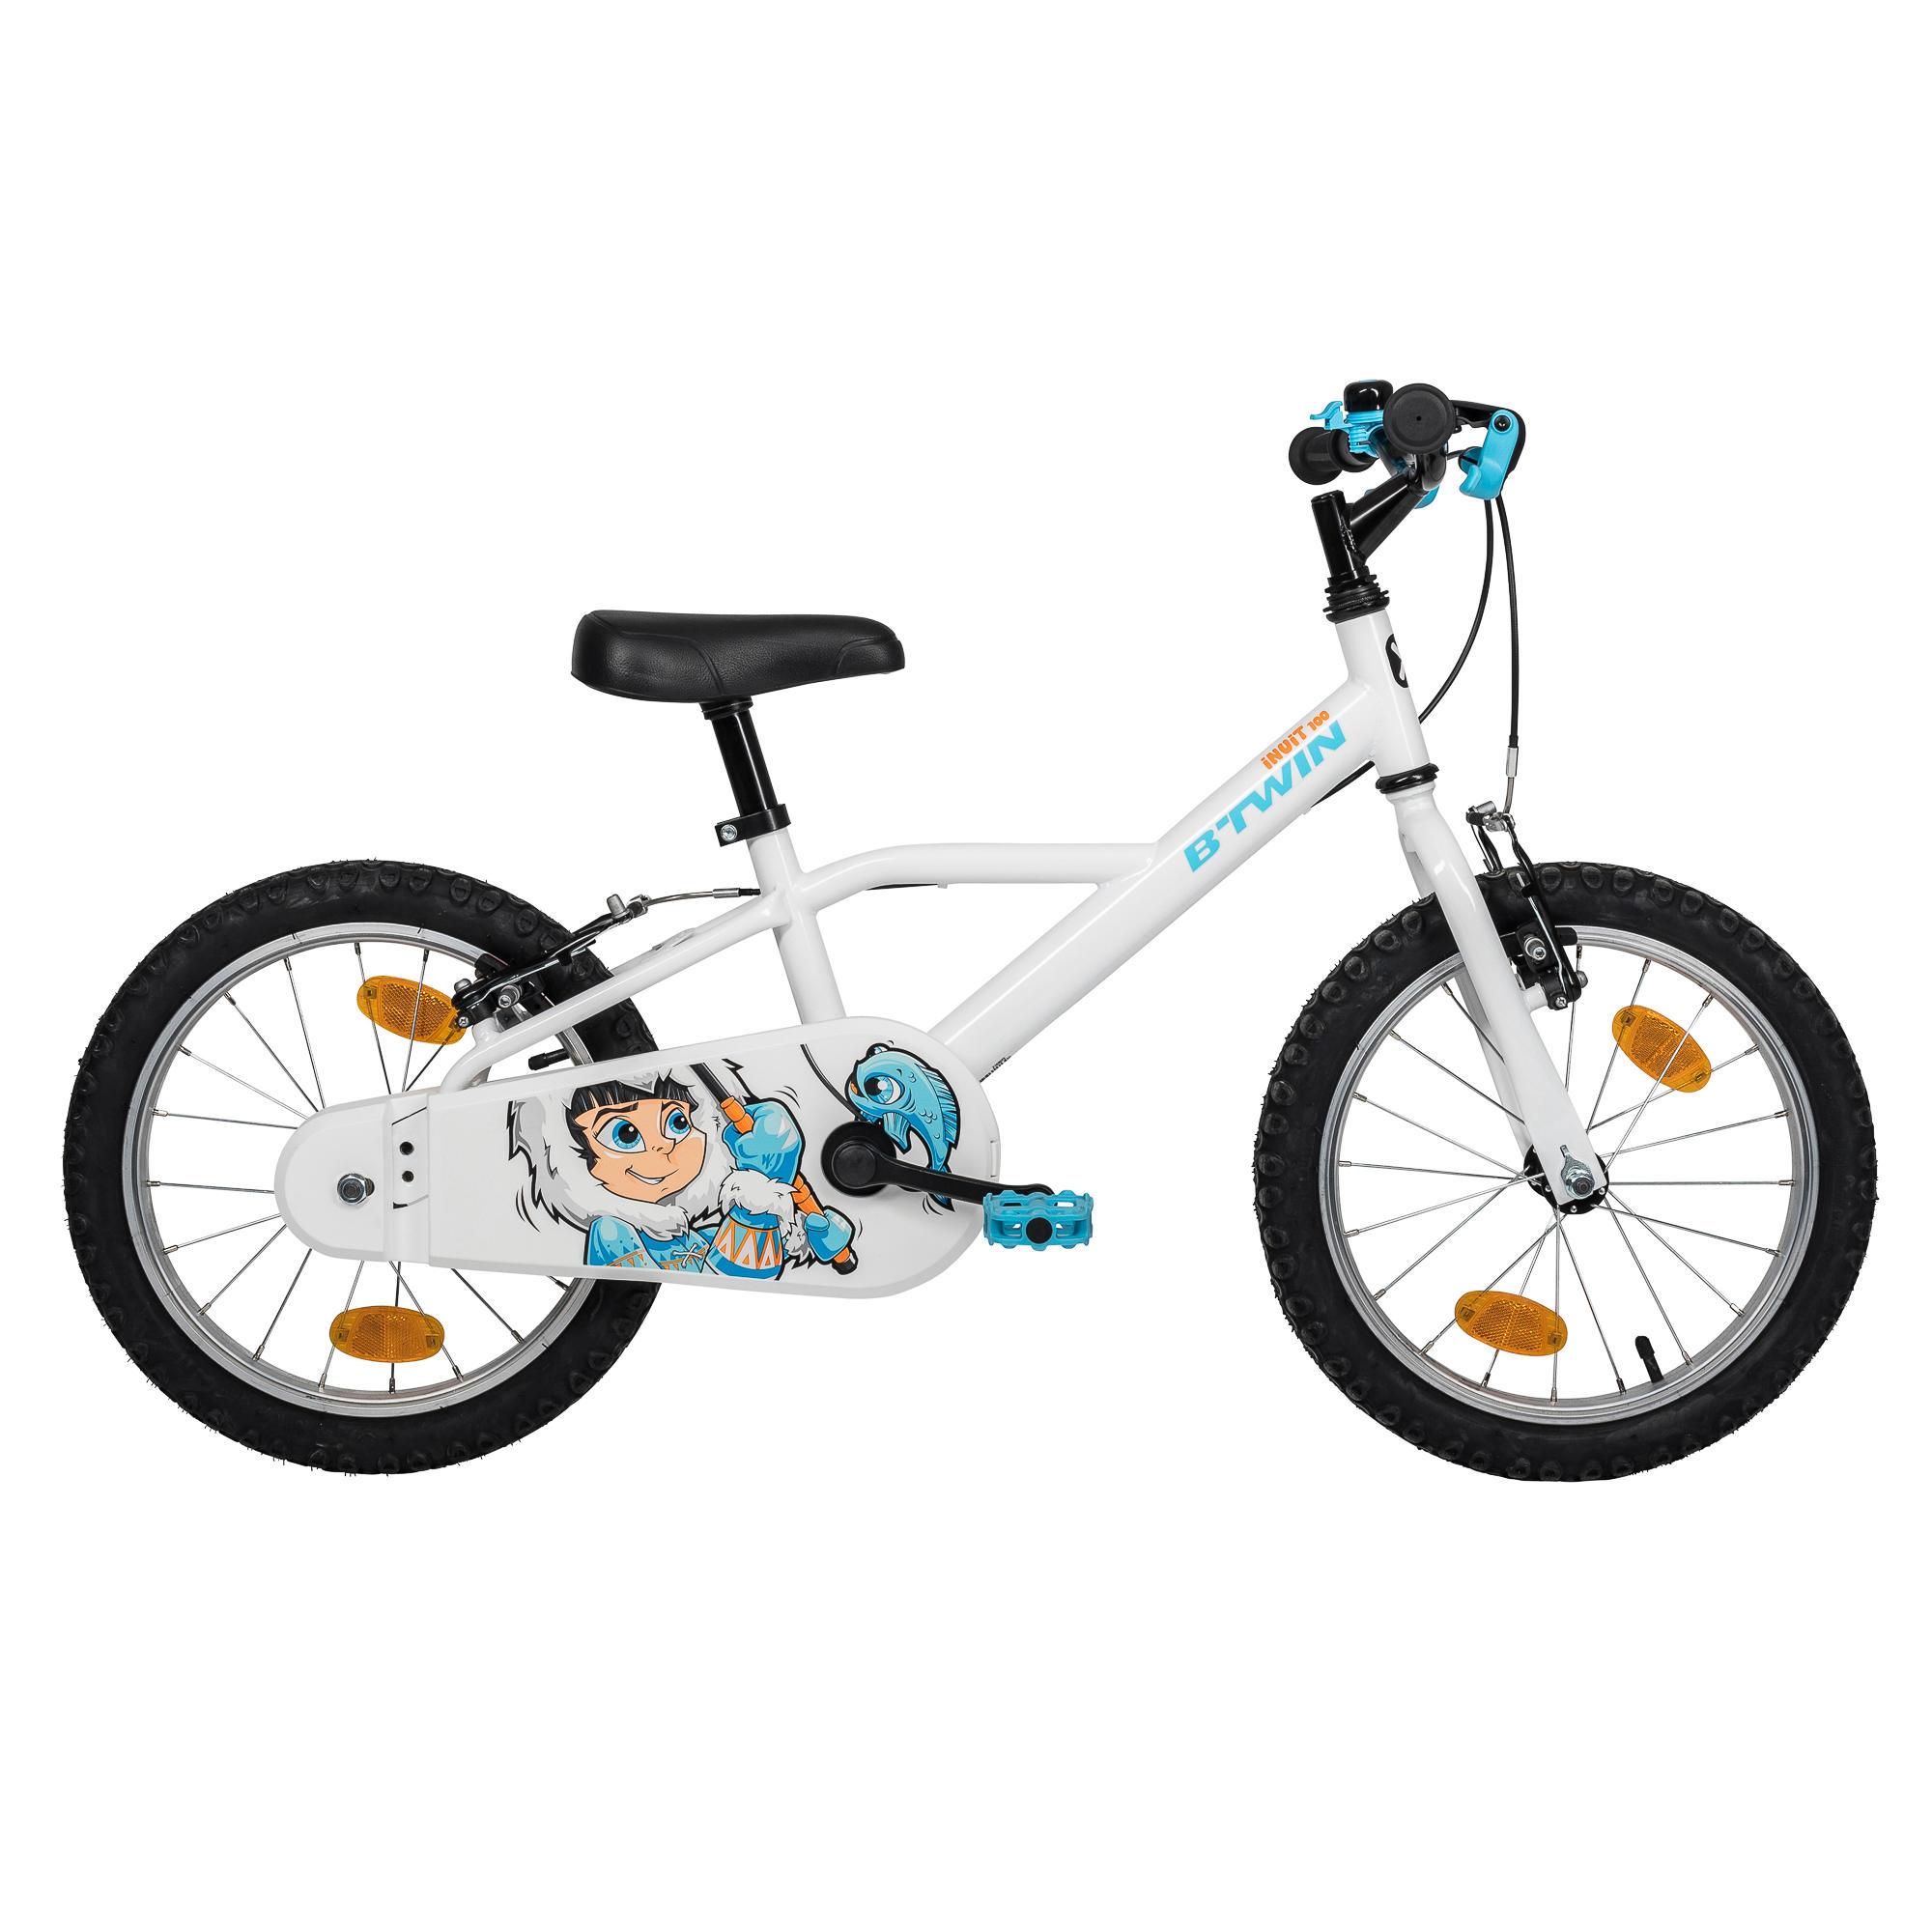 children's 16 inch bikes with stabilisers